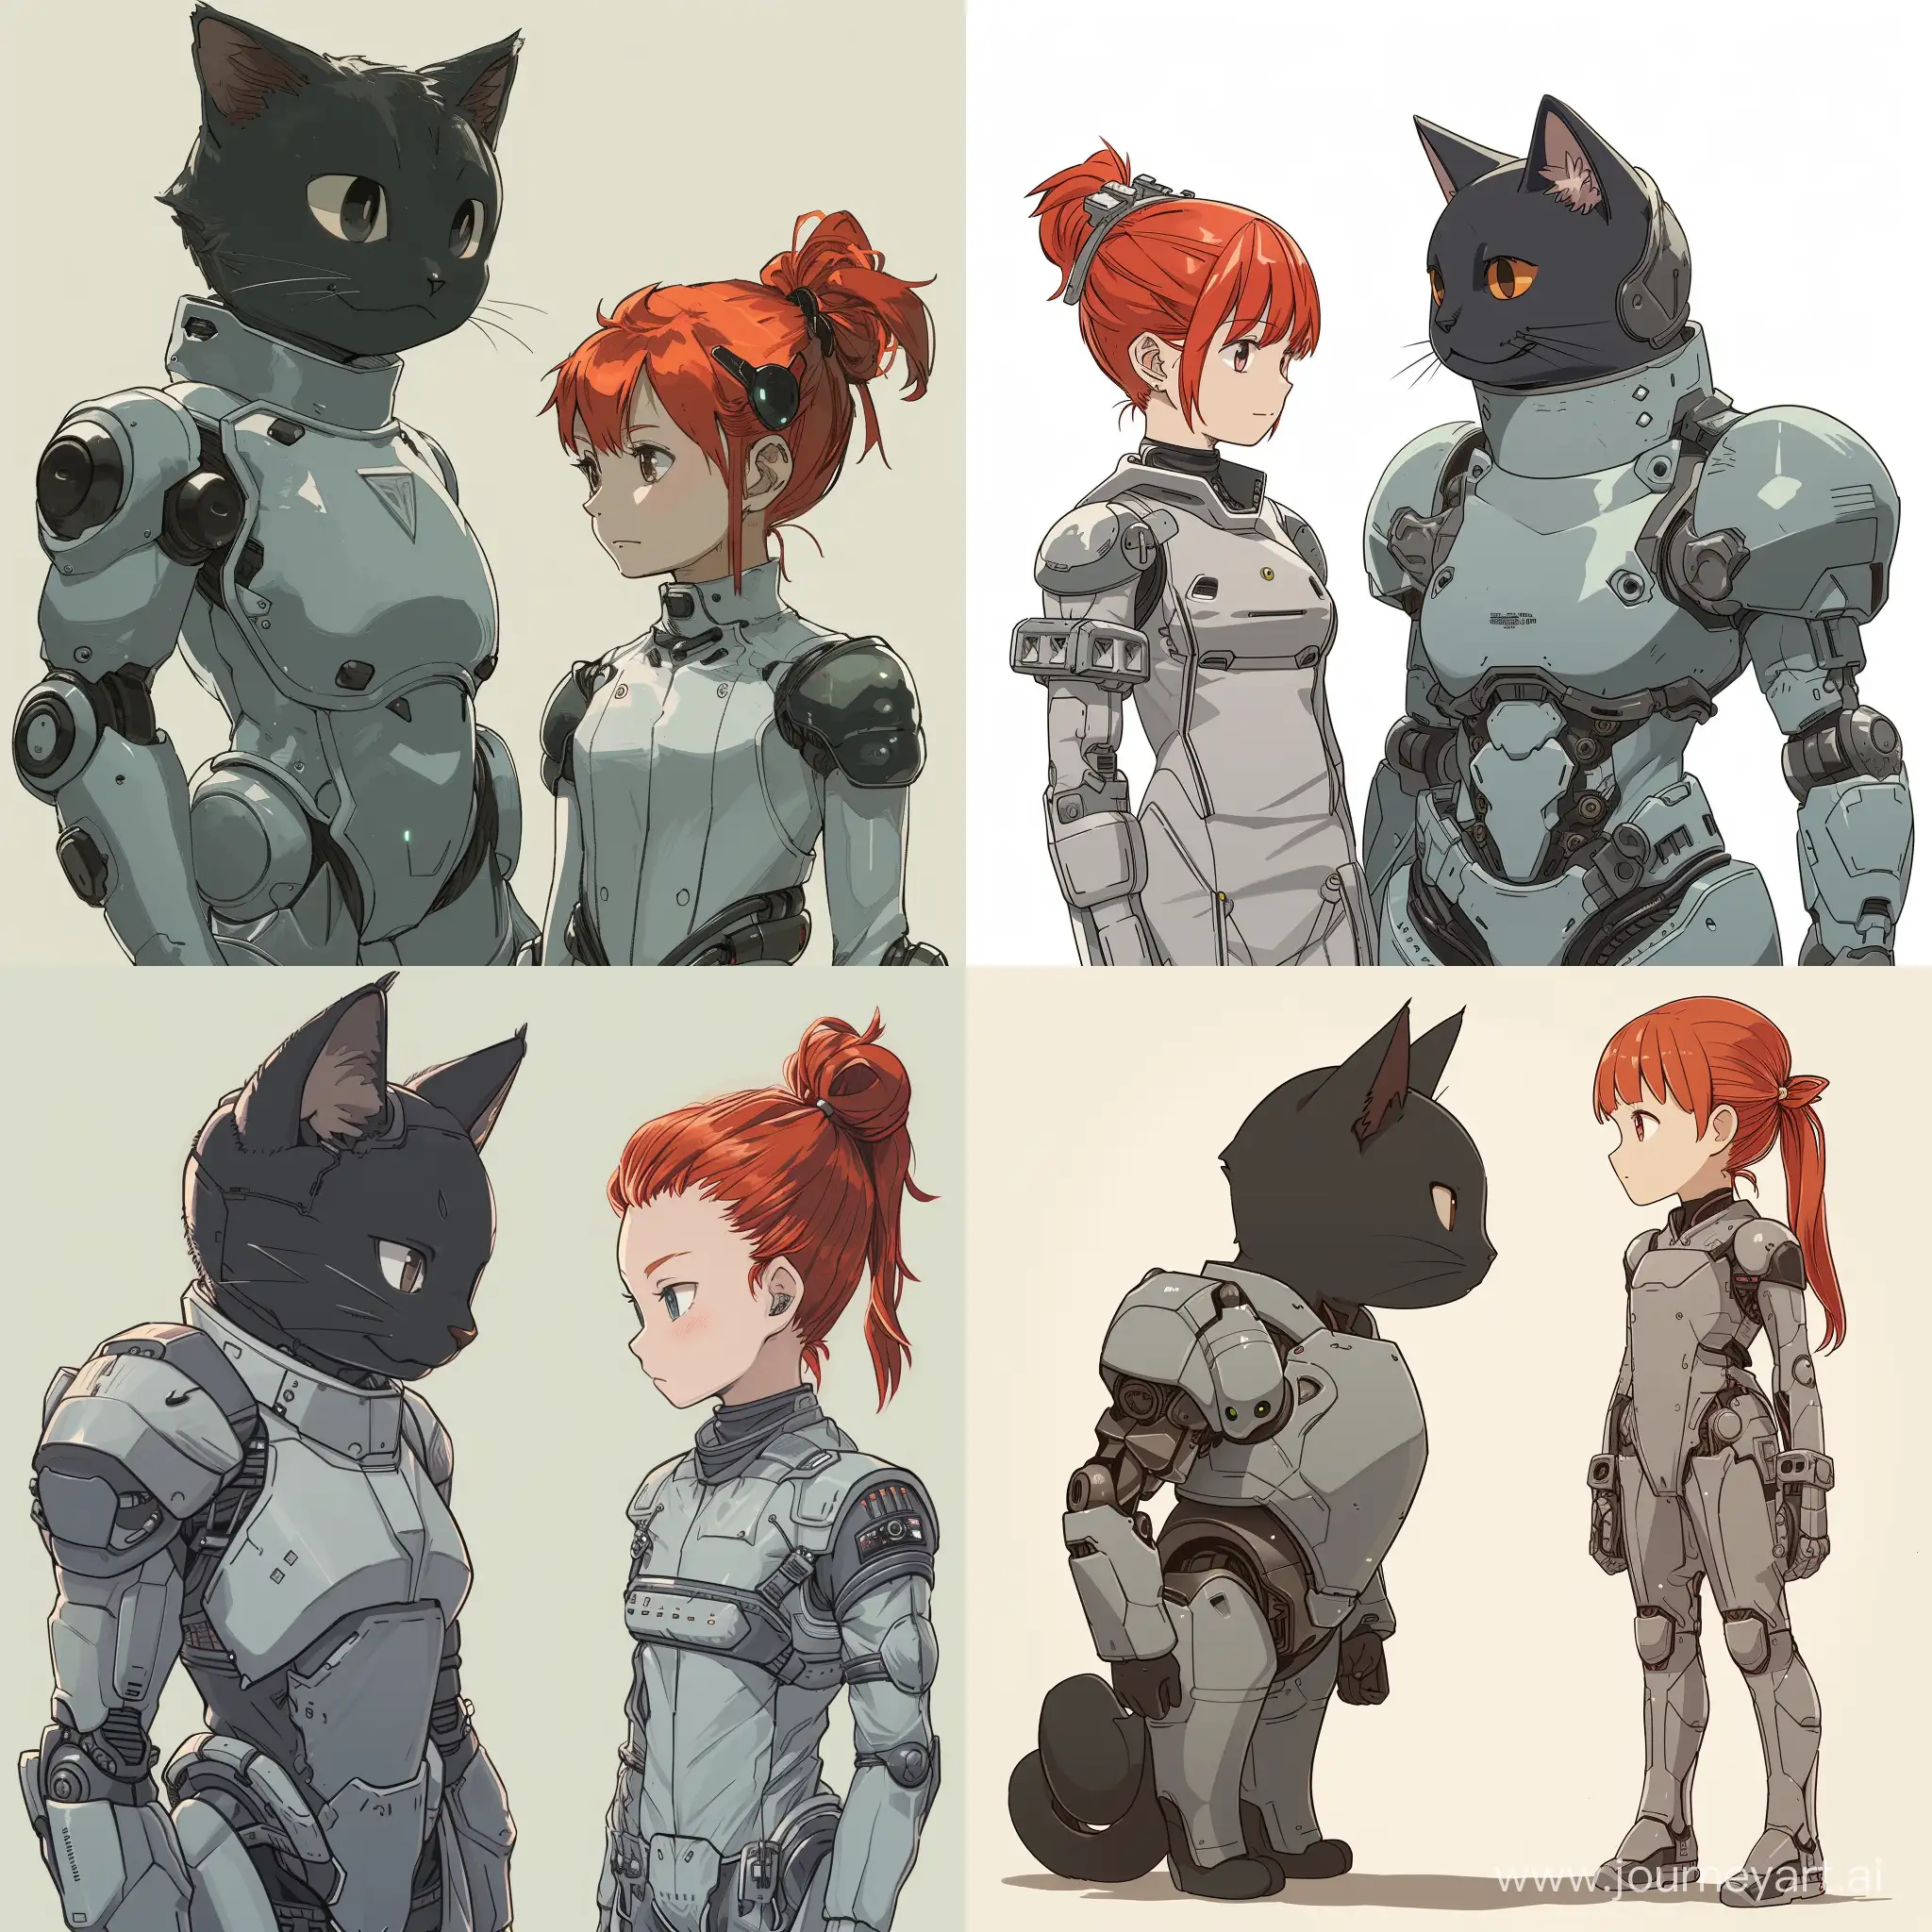 Bionic-Cat-Guardian-Stands-with-RedHaired-Anime-Girl-in-Matching-Armor